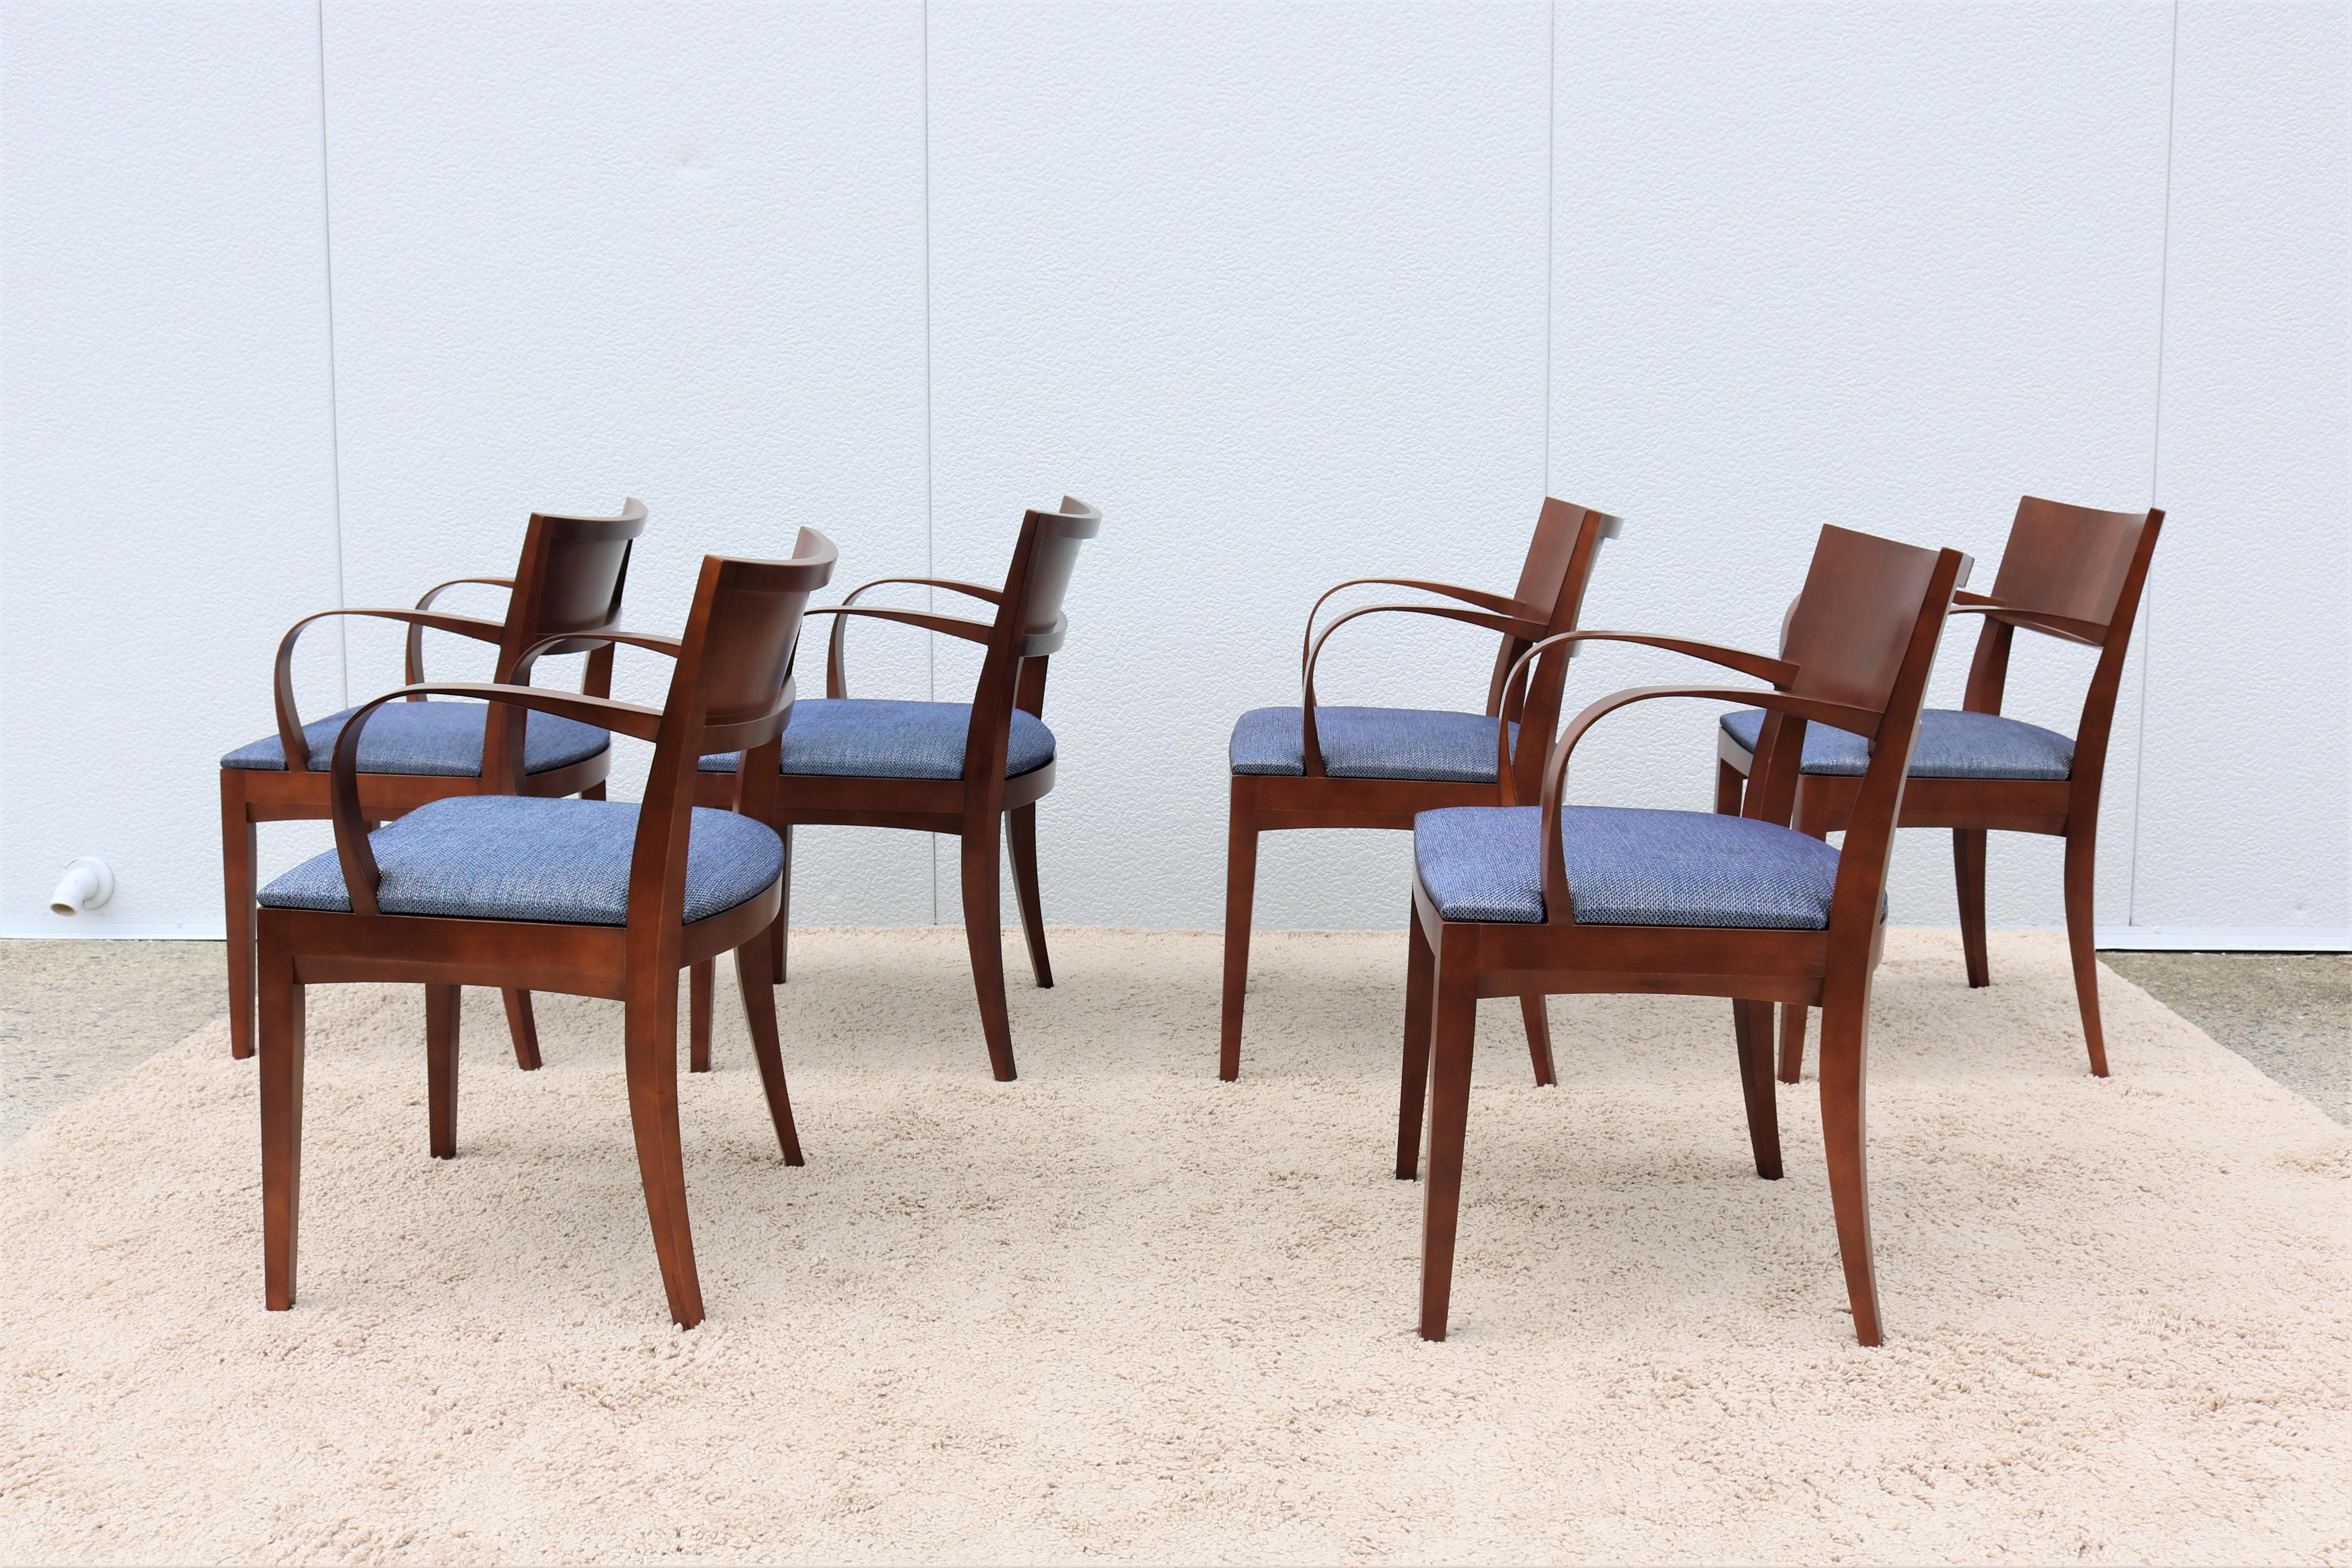 Contemporary Jonathan Crinion for Knoll Crinion Wood Side Armchairs - Set of 6 In Good Condition For Sale In Secaucus, NJ